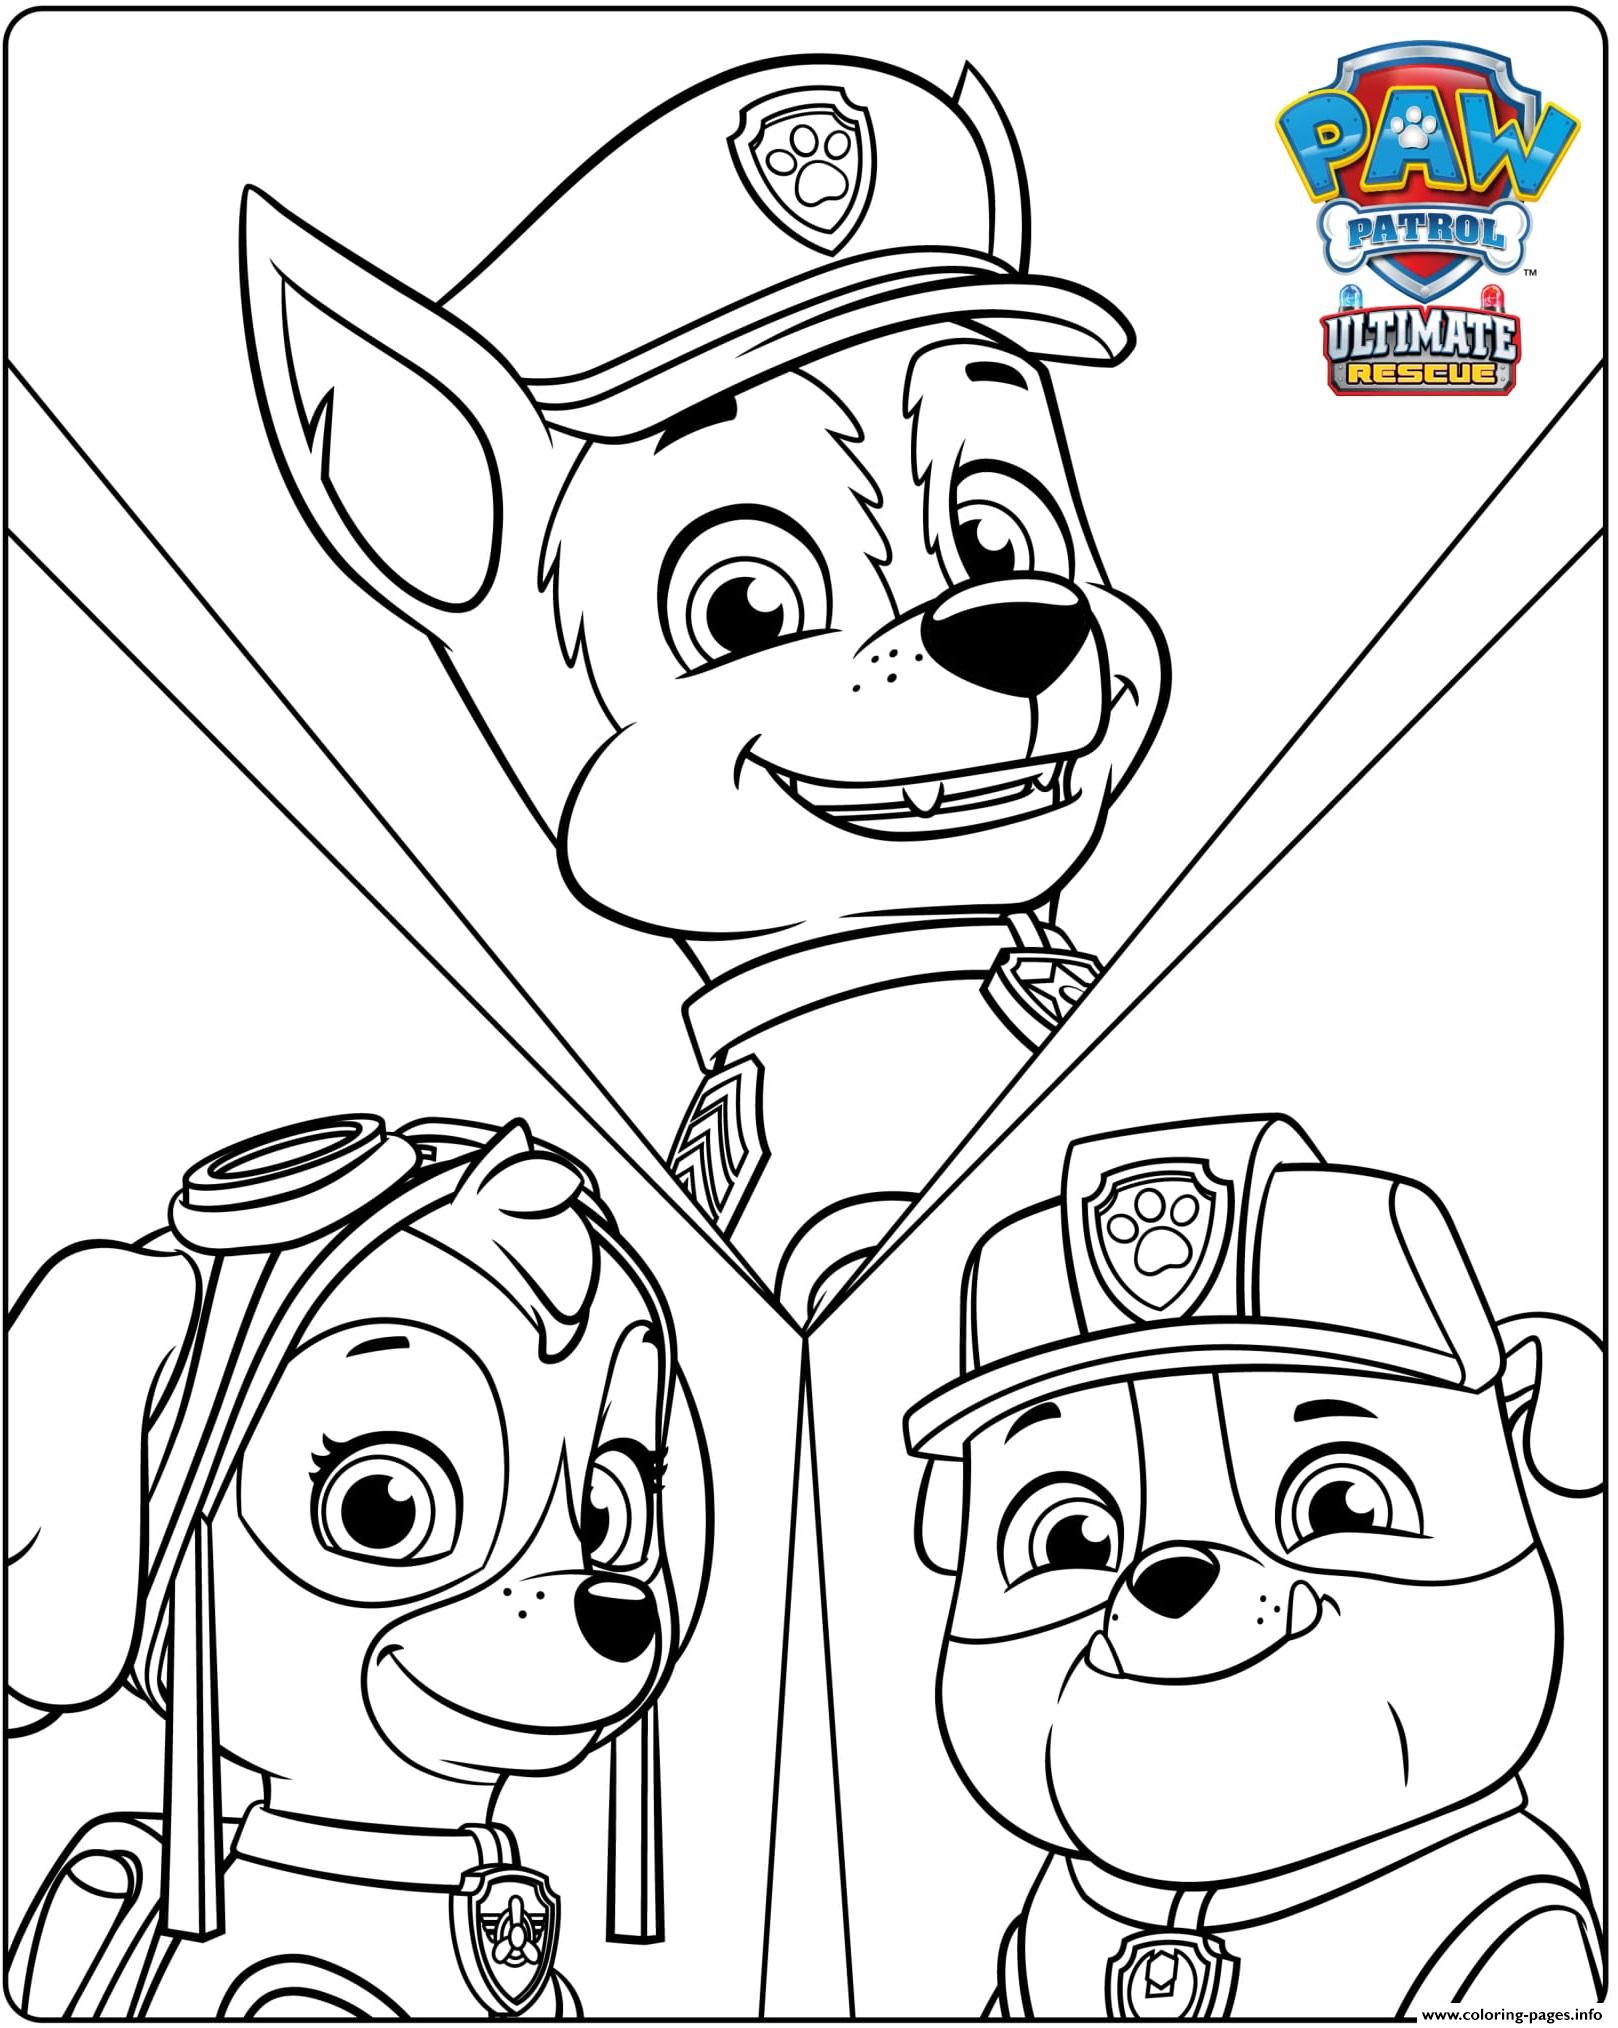 Sky Paw Patrol Coloring Pages - Coloring Home